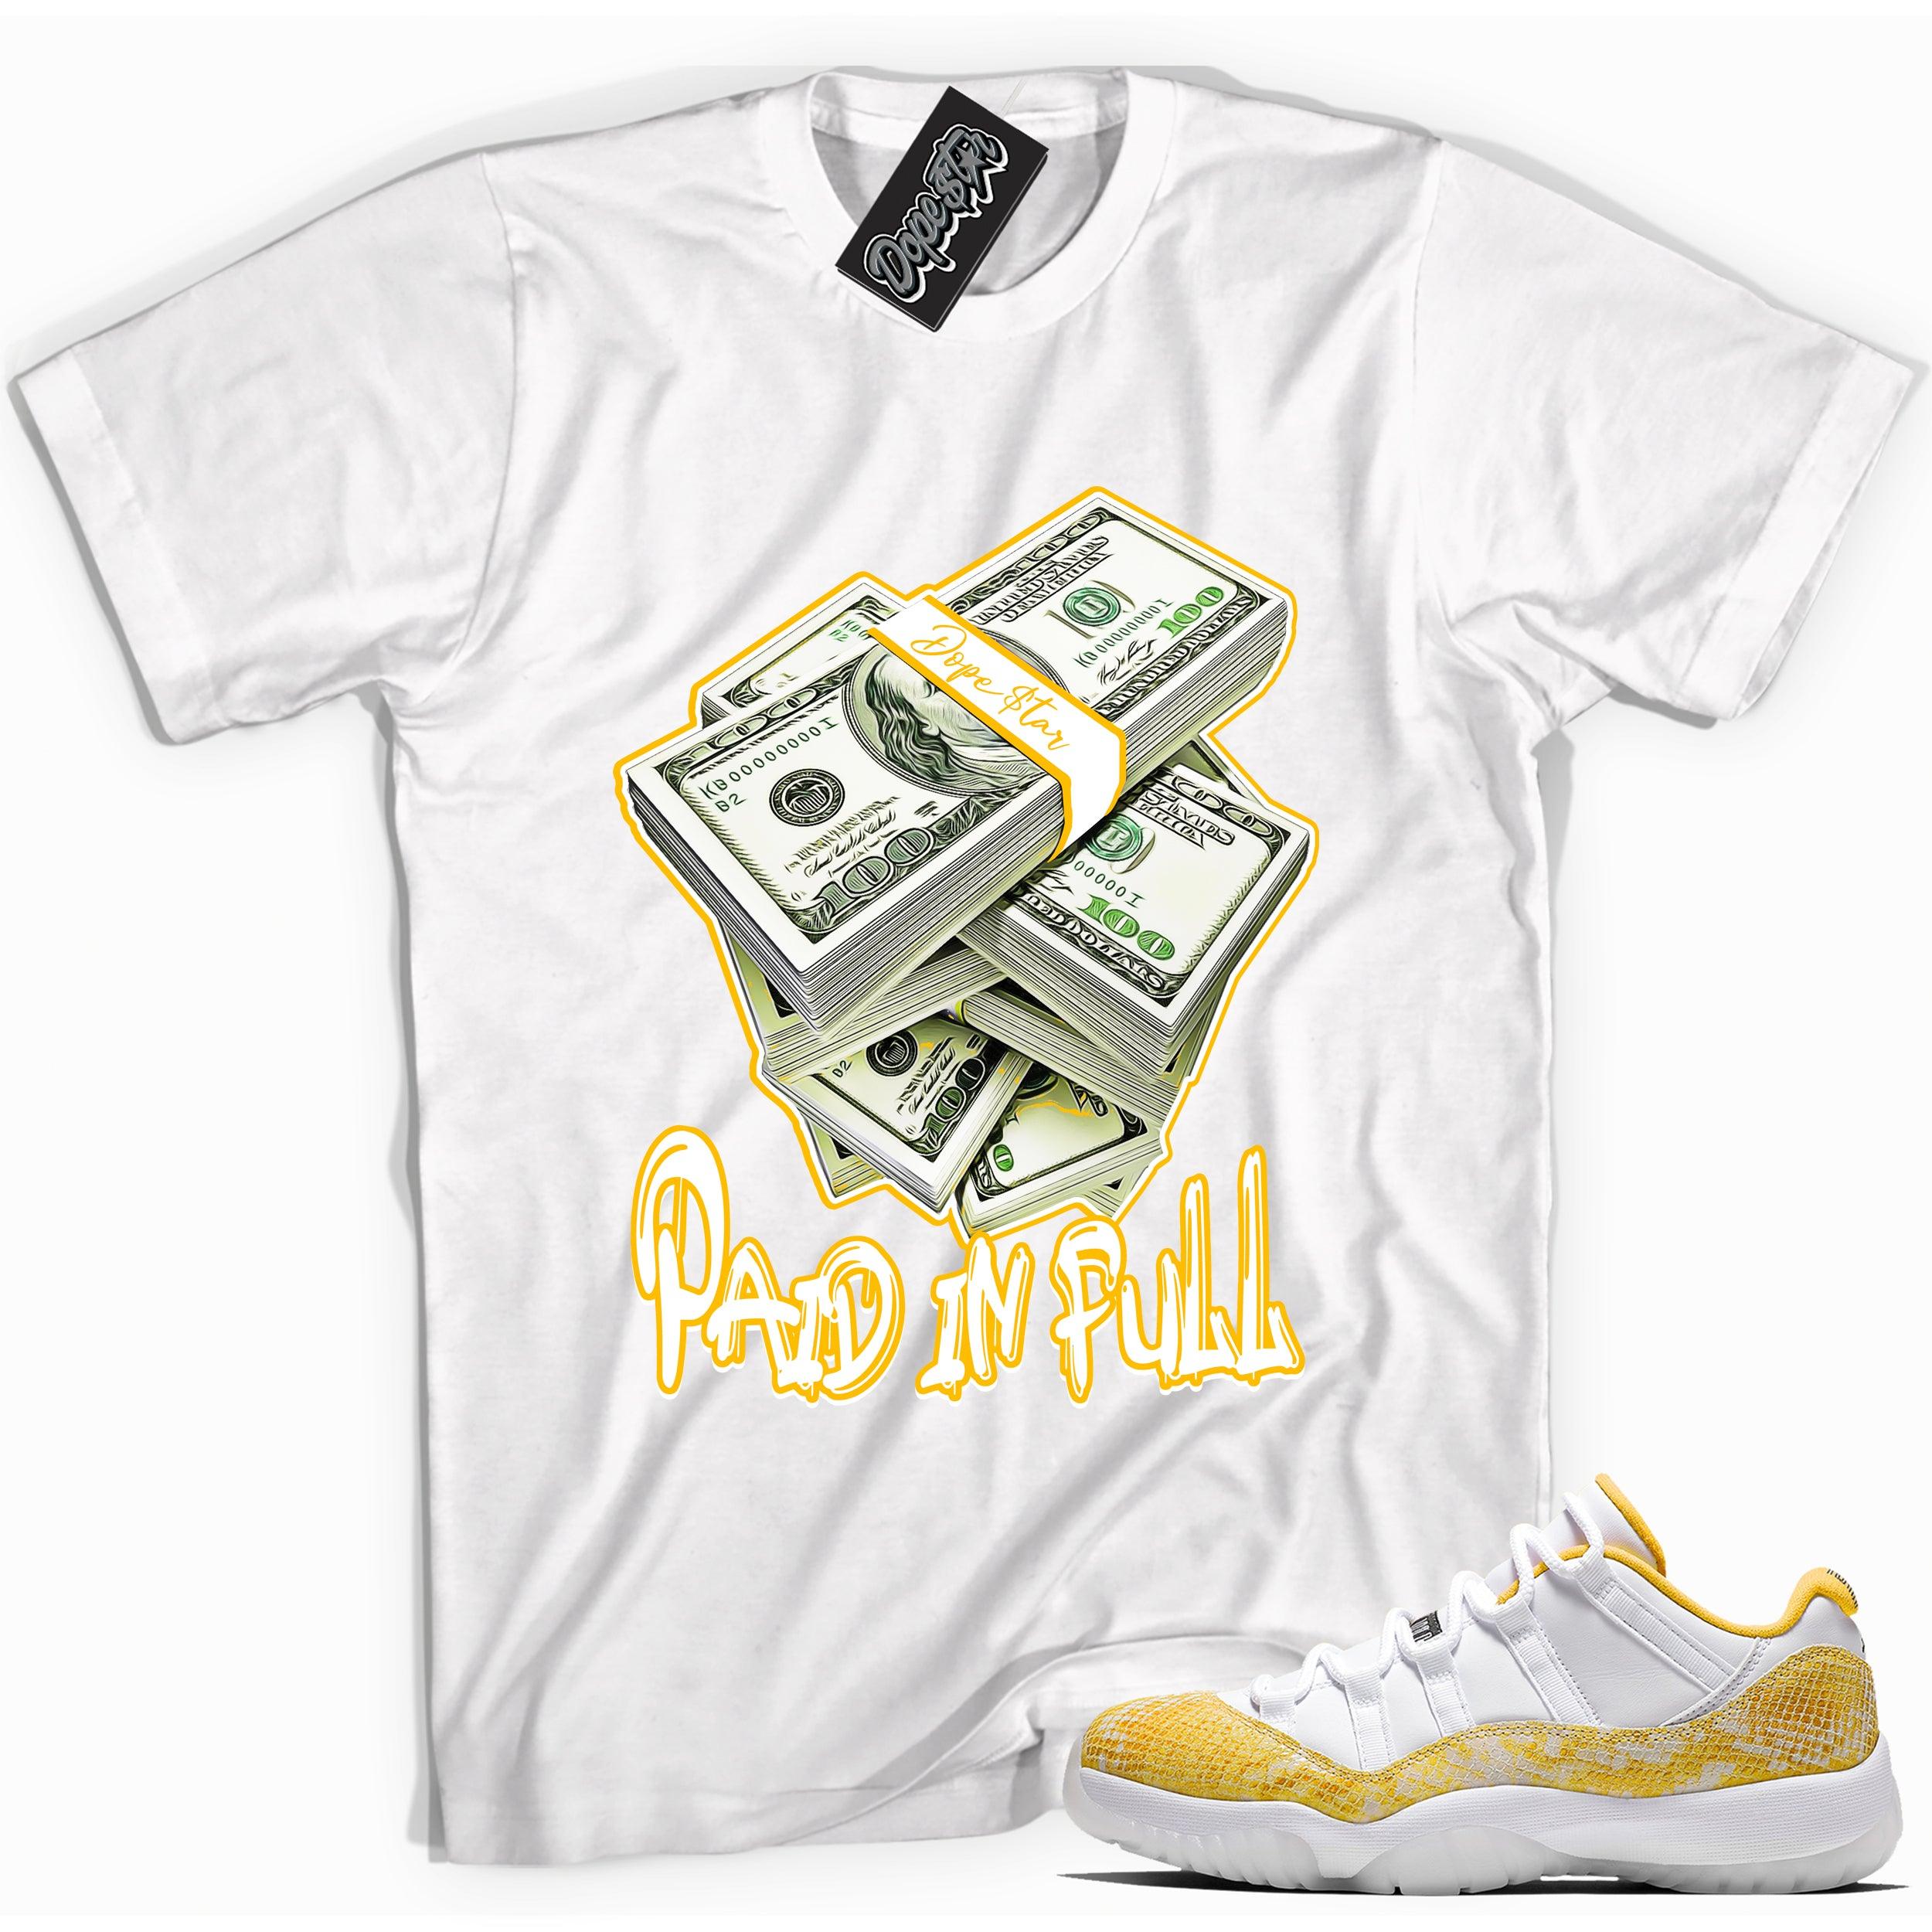 Cool white graphic tee with 'paid in full' print, that perfectly matches Air Jordan 11 Retro Low Yellow Snakeskin sneakers